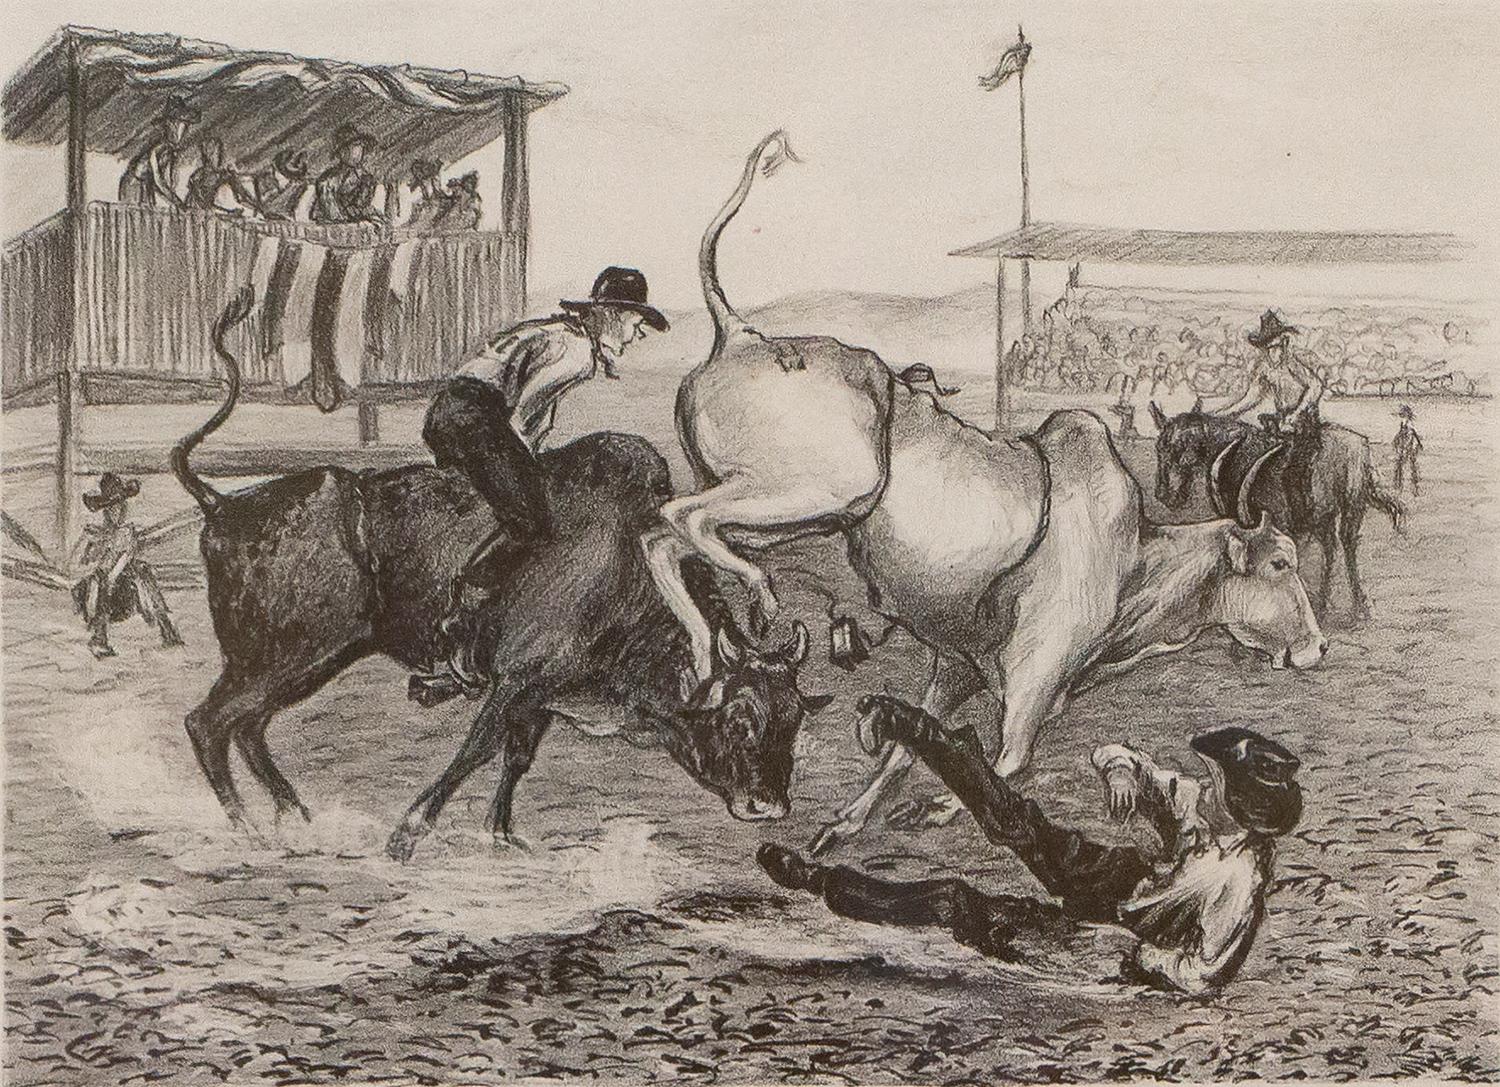 A horizontal lithograph print by Janet Turner. This work features bull riders in a rodeo in black and white, and is representative of the animal and nature prints that this American Modern artist is most known for. It is from an edition set of 10